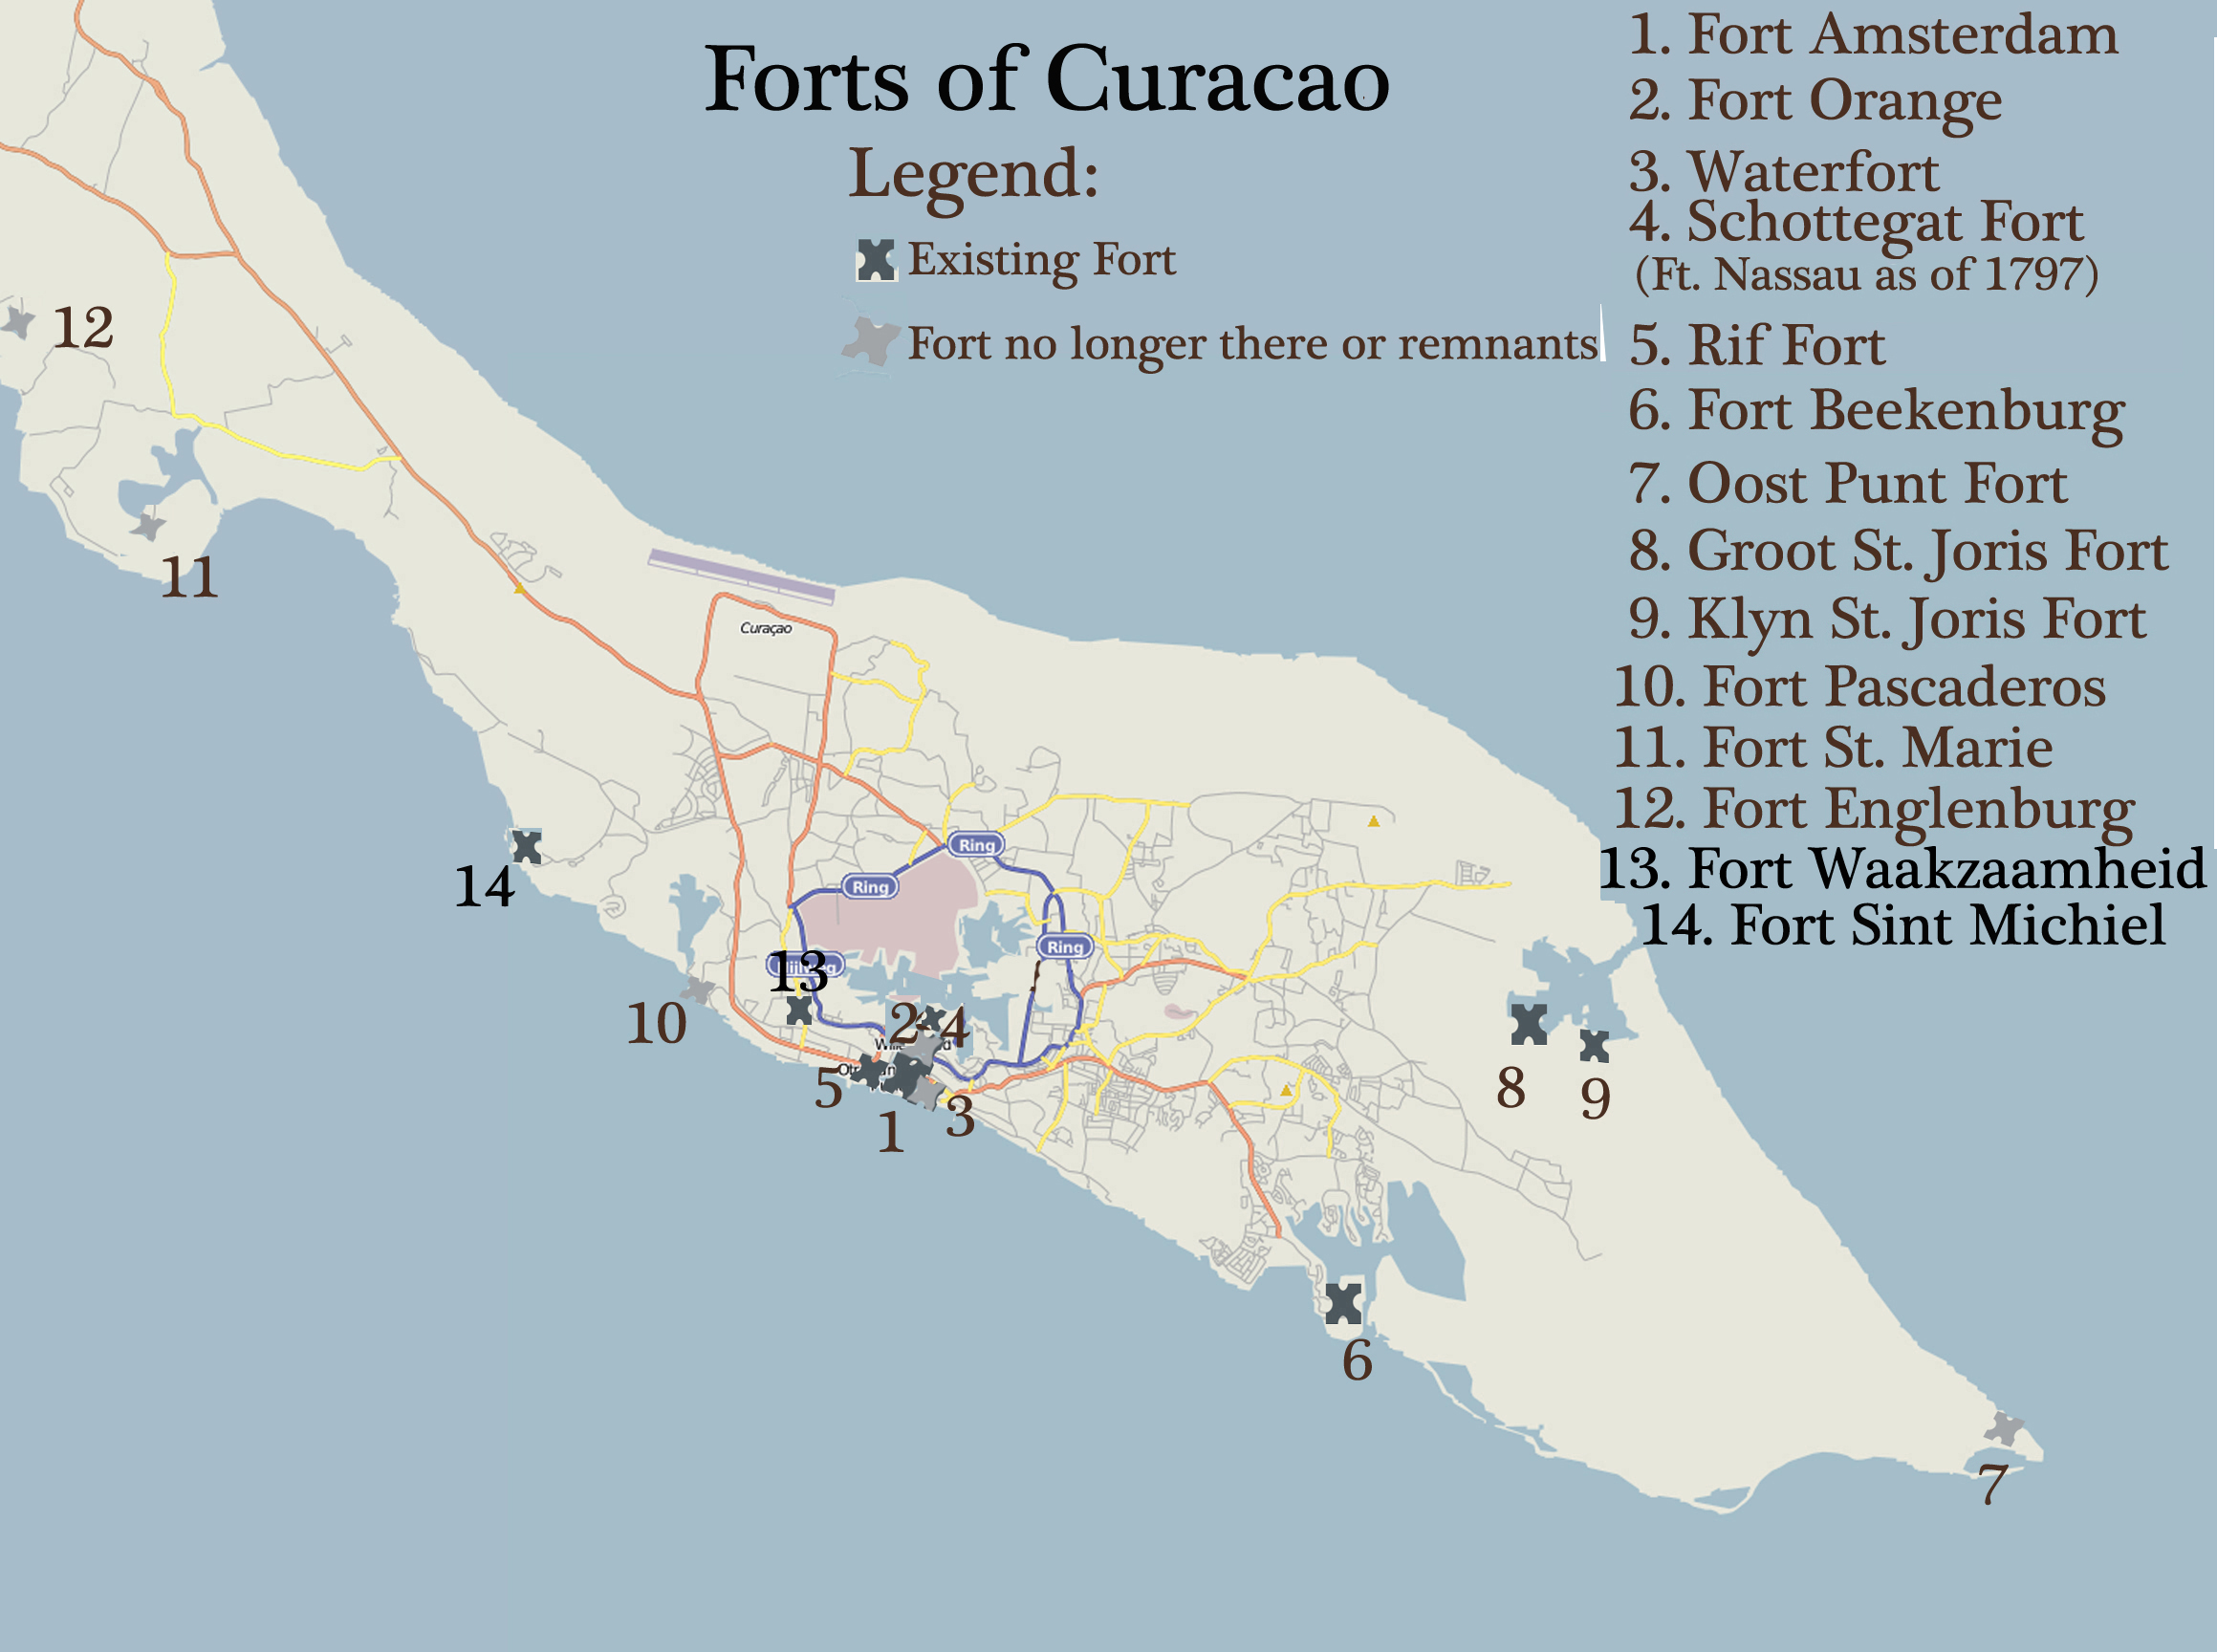 Shields Forts of Curacao